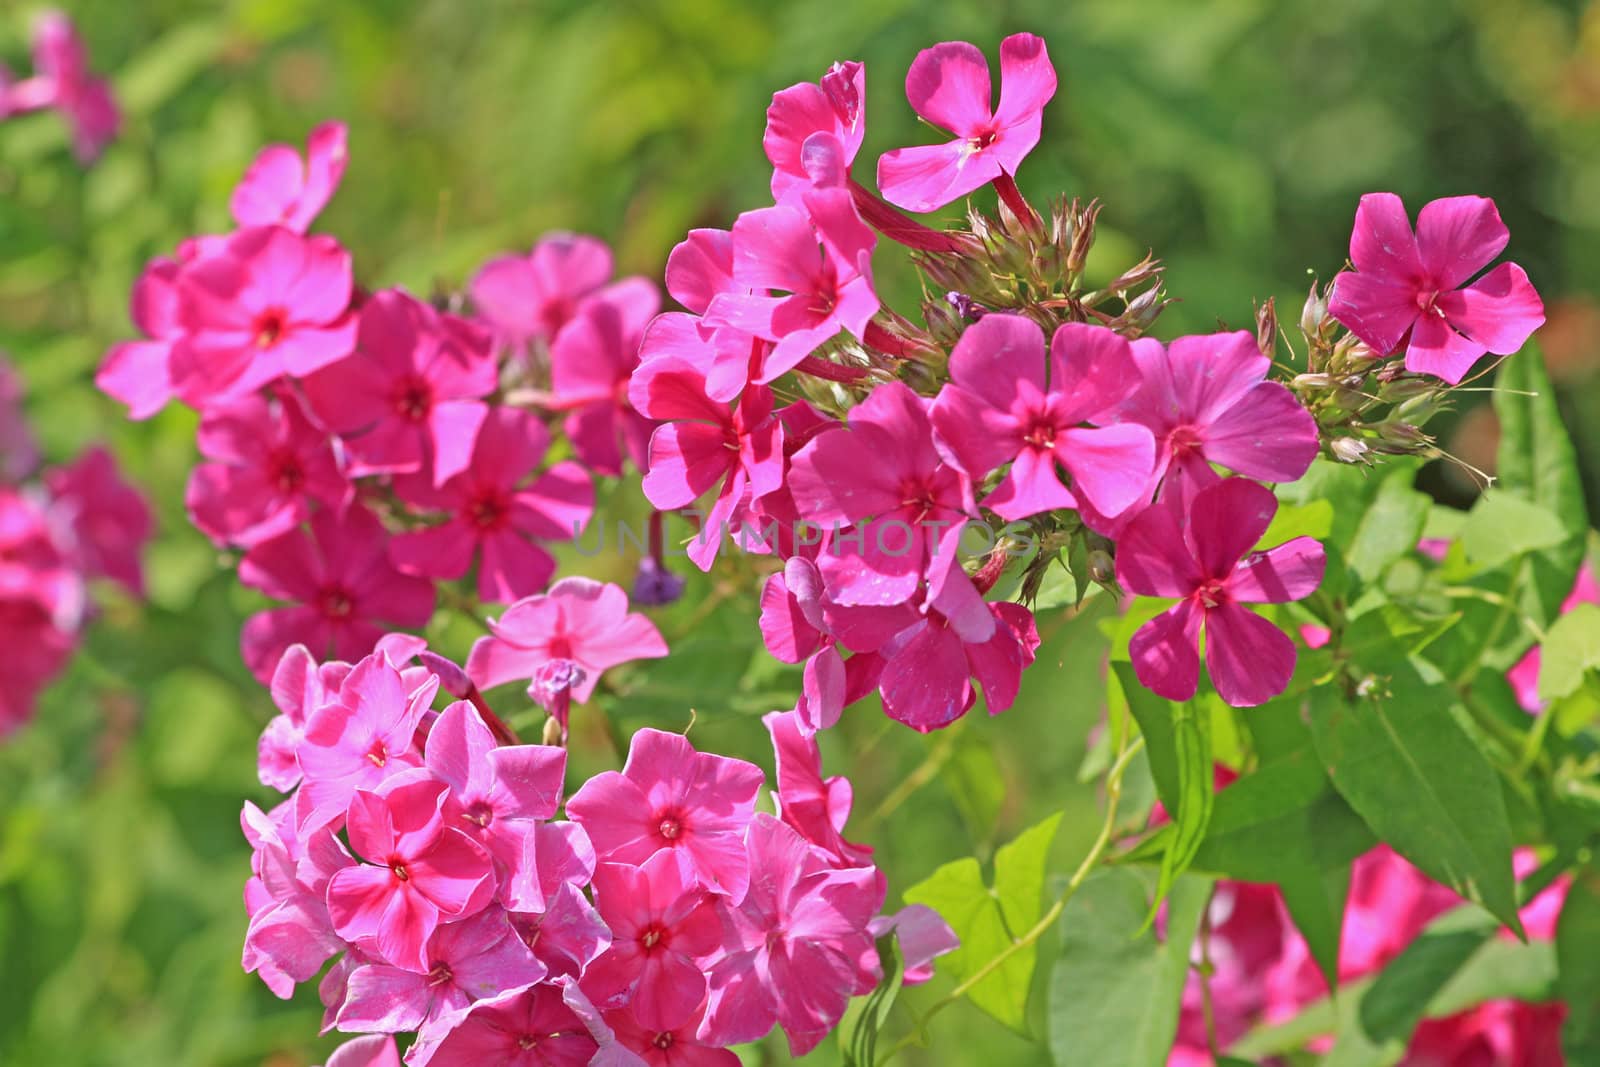 Close up of the pink phlox blossoms.